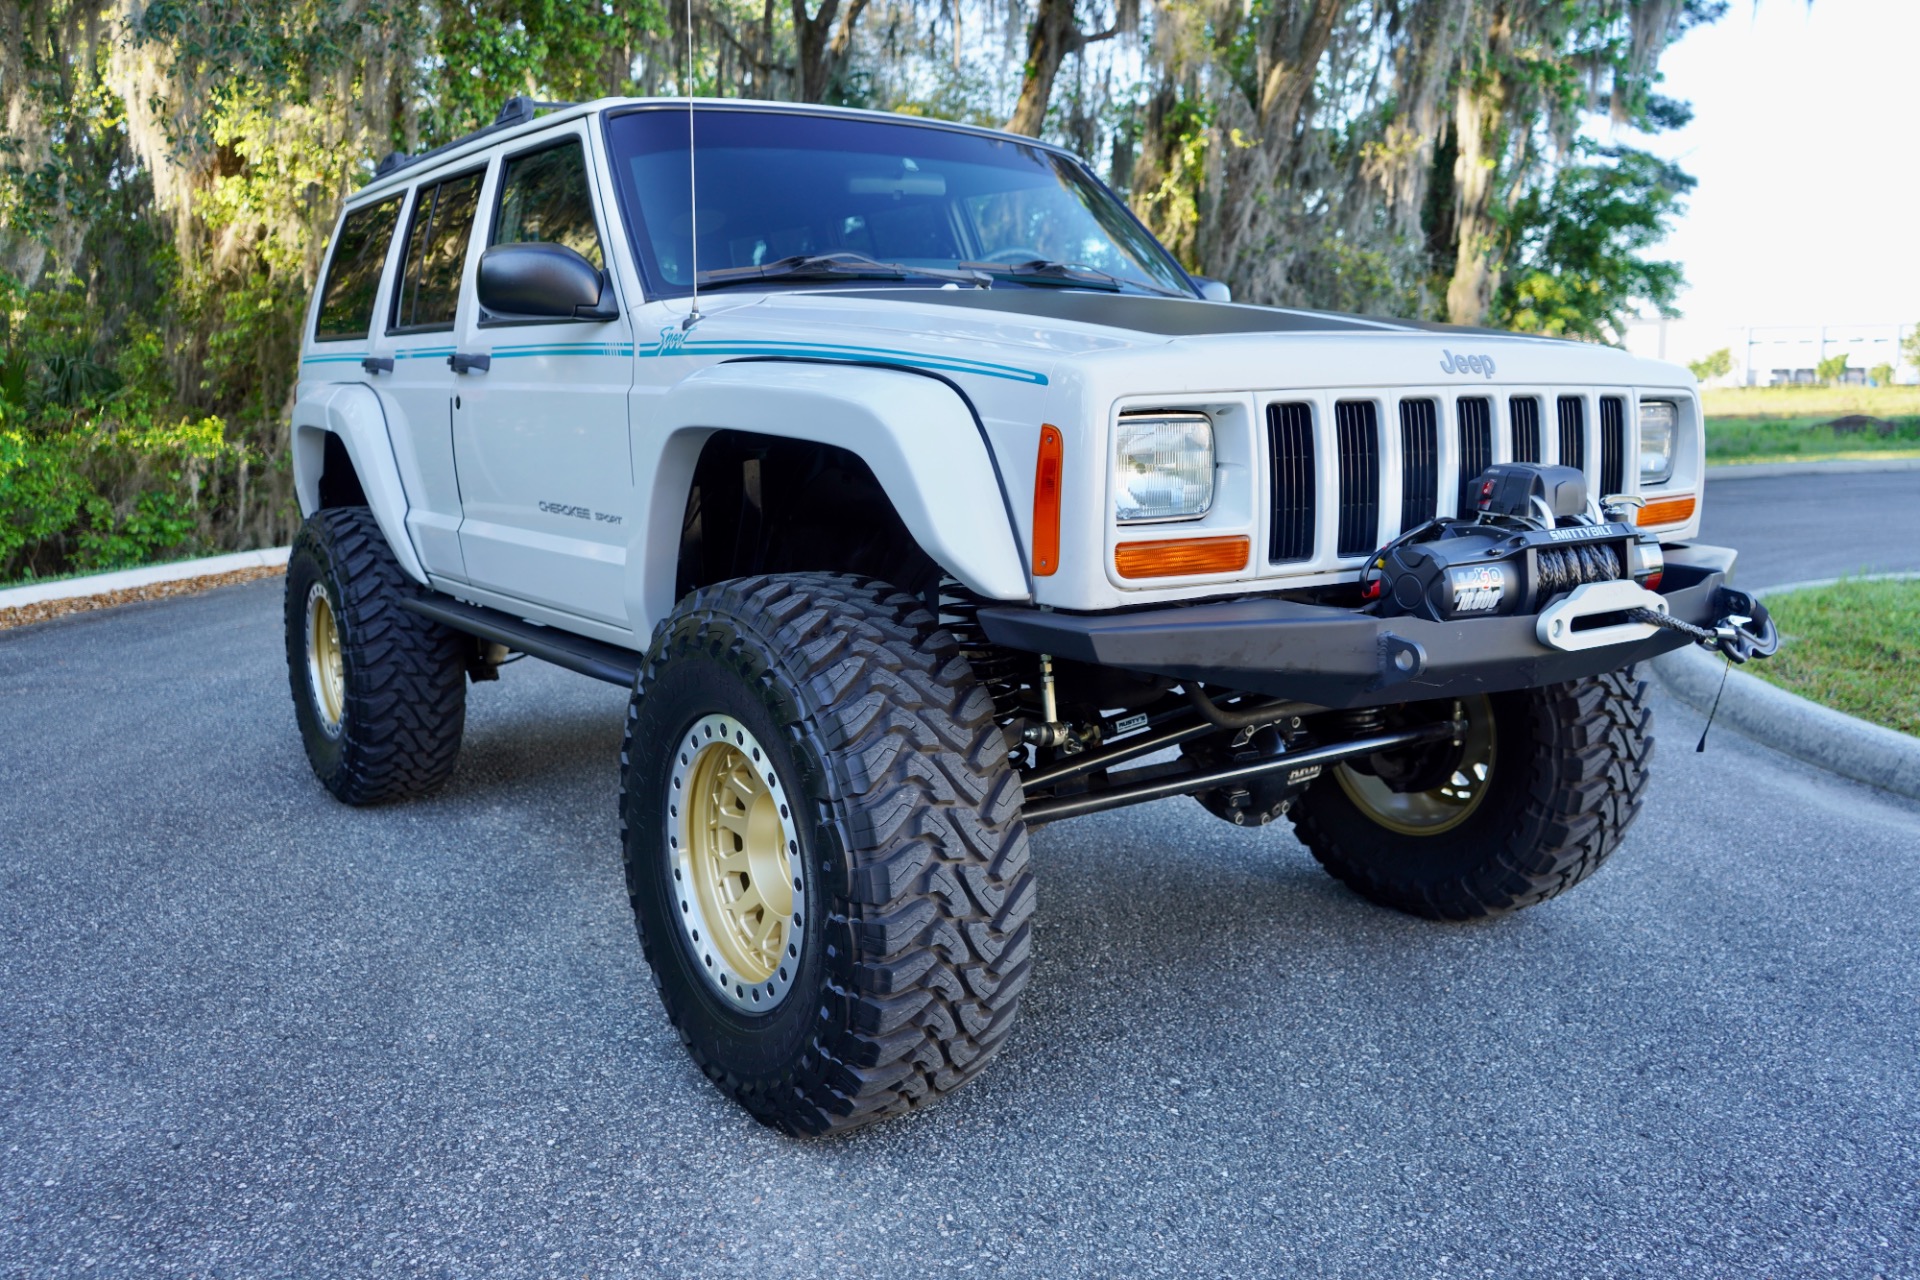 Used-1999-Jeep-Cherokee-SPORT-4X4-KCO-FRESH-BUILD-SPORT-1711215257-for-sale-06